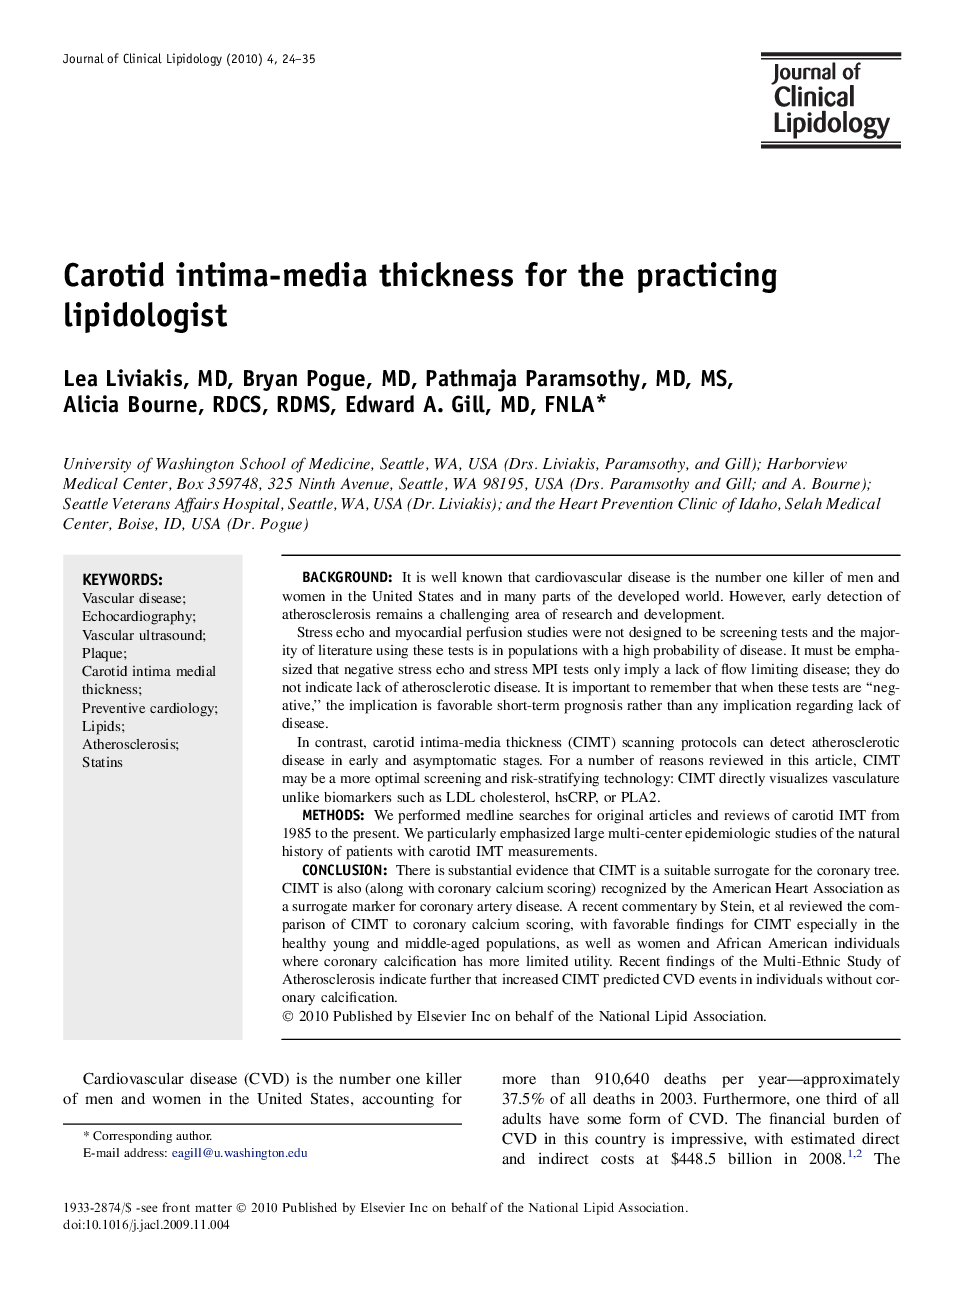 Carotid intima-media thickness for the practicing lipidologist